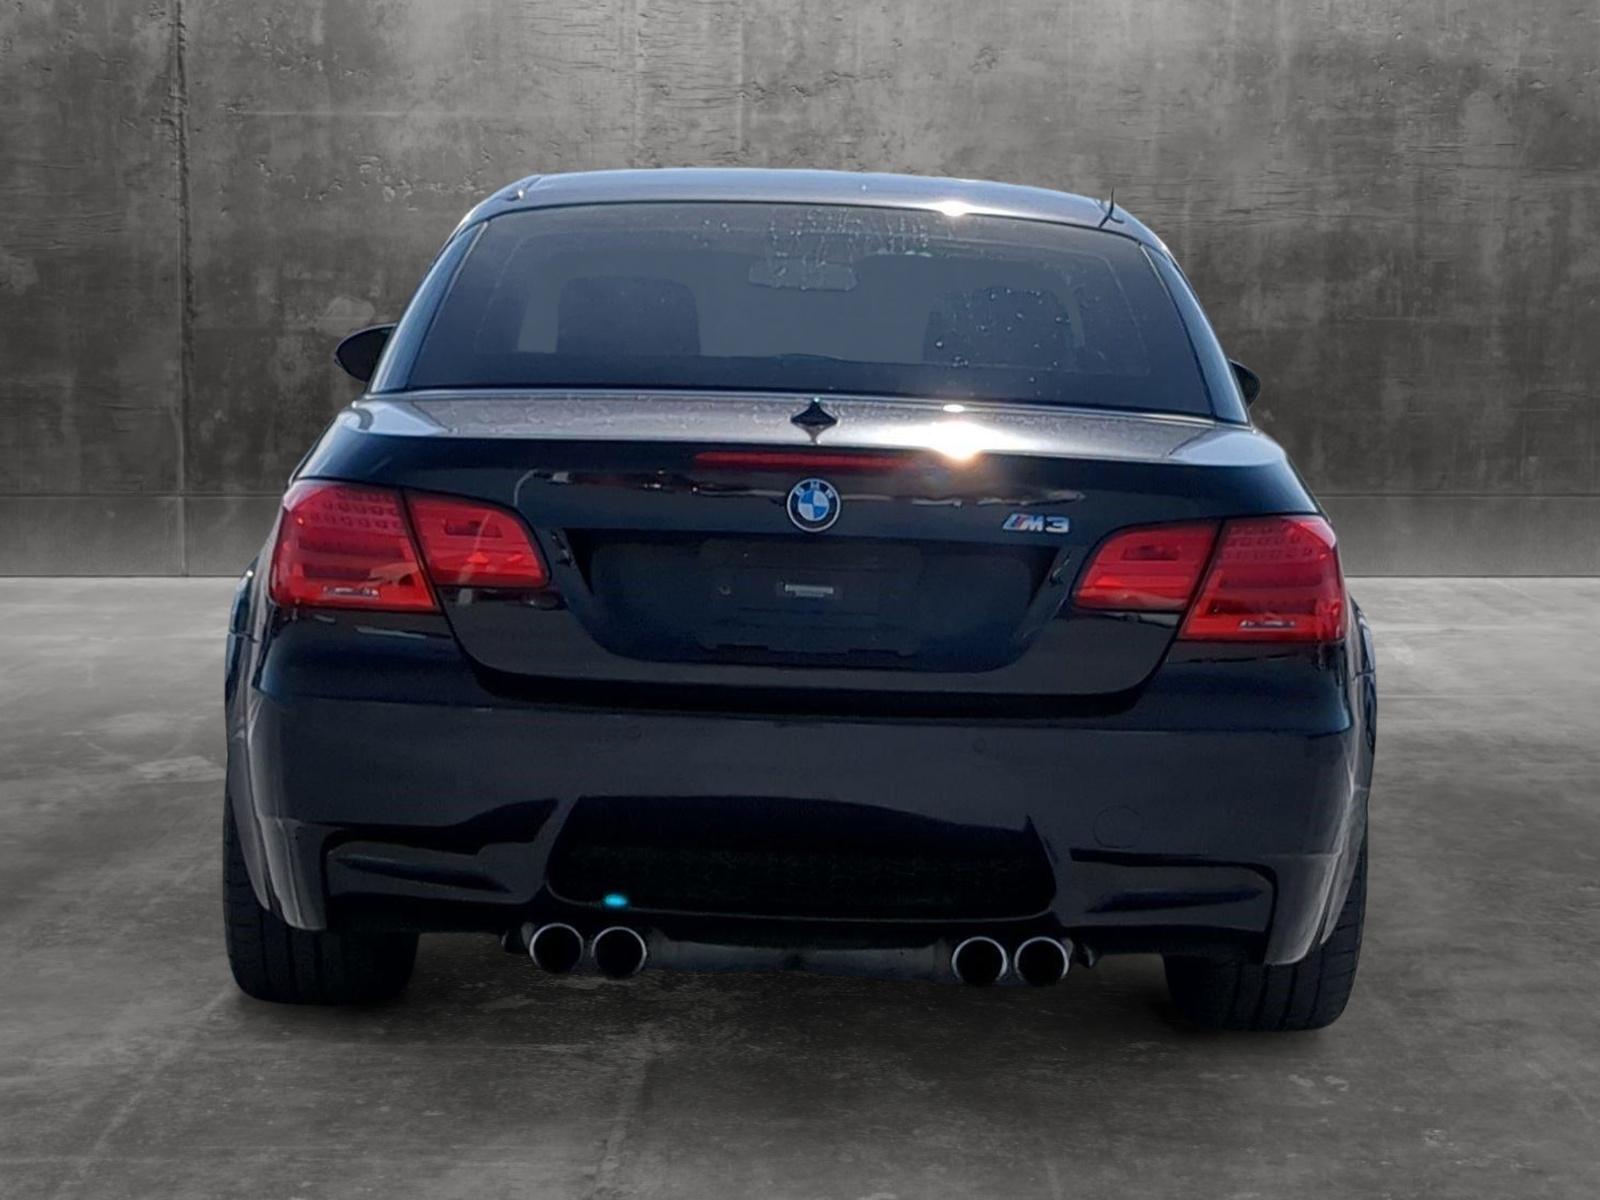 2012 BMW M3 Vehicle Photo in Clearwater, FL 33764